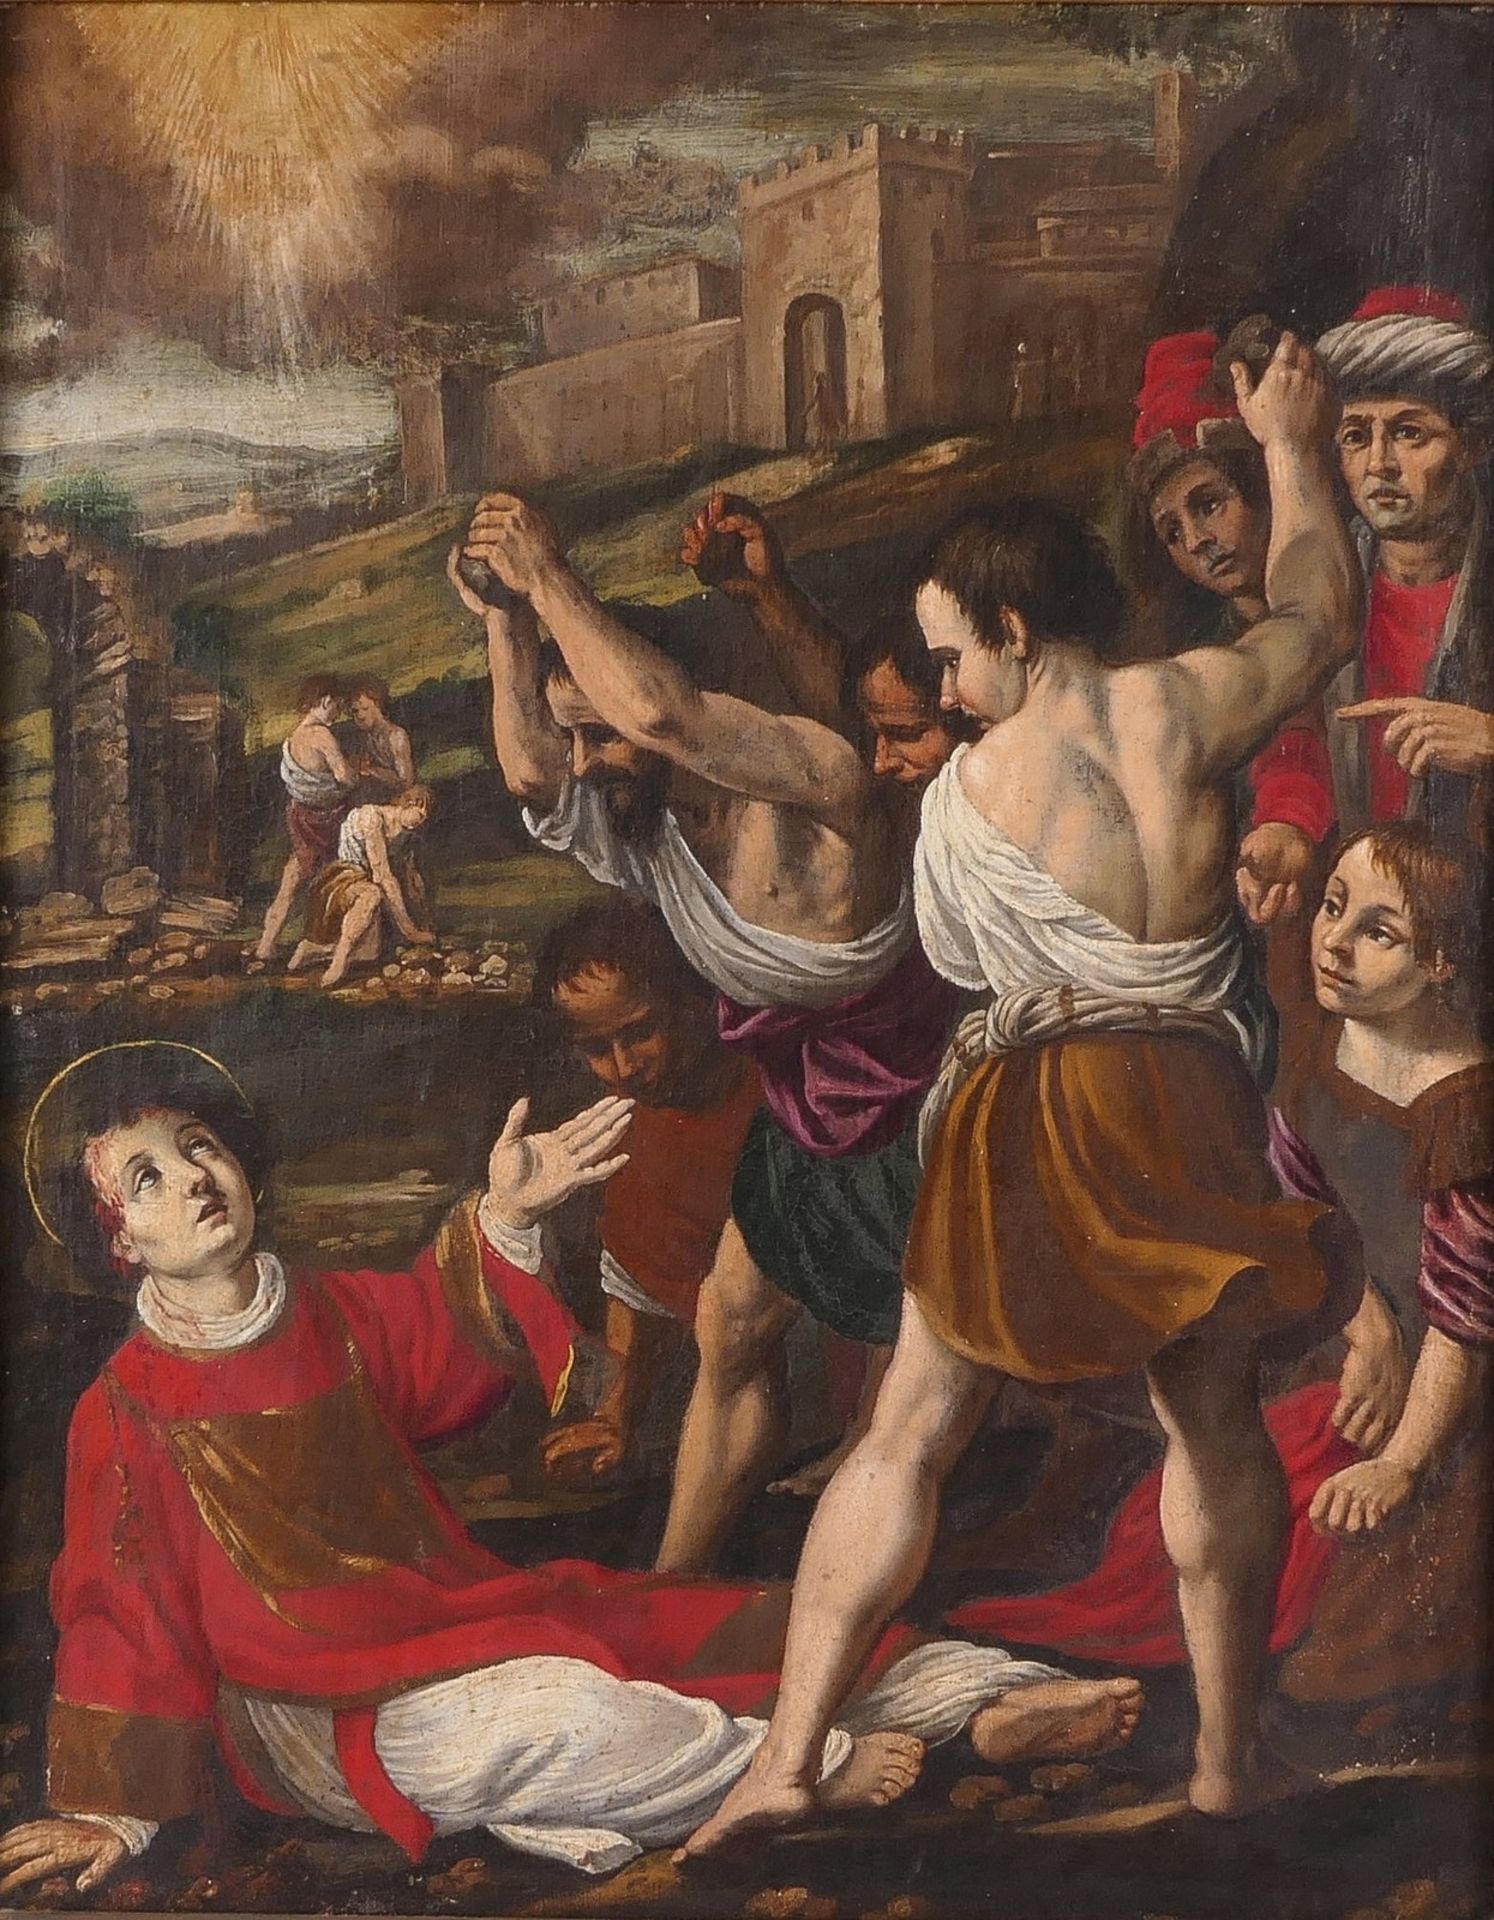 No signature, stoning of St. Stephen, oil on canvas, late 17thC-18thC, 58,5 x 76,5 cm (different